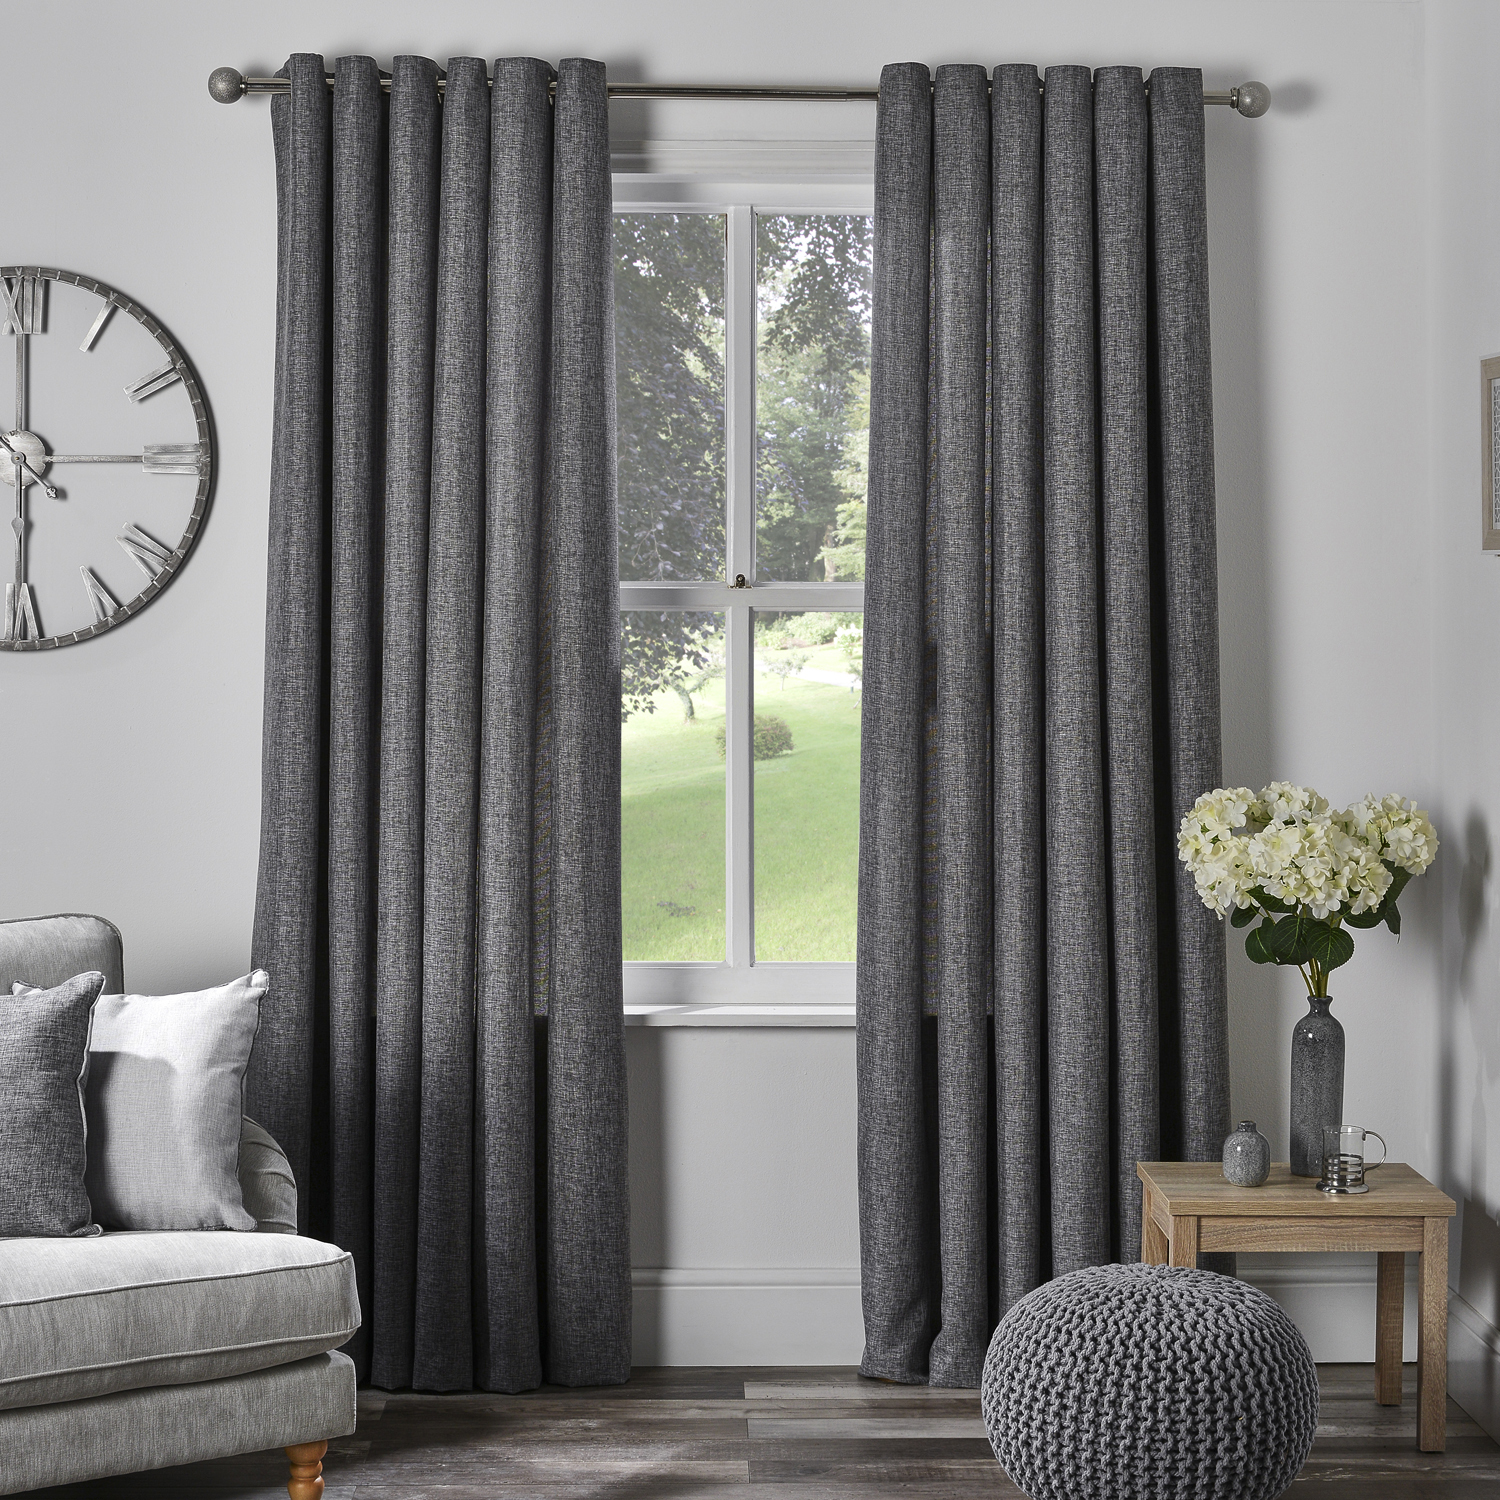 Divante Chatsworth Slate Thermal Lined Eyelet Curtains 137 x 168cm Image 1